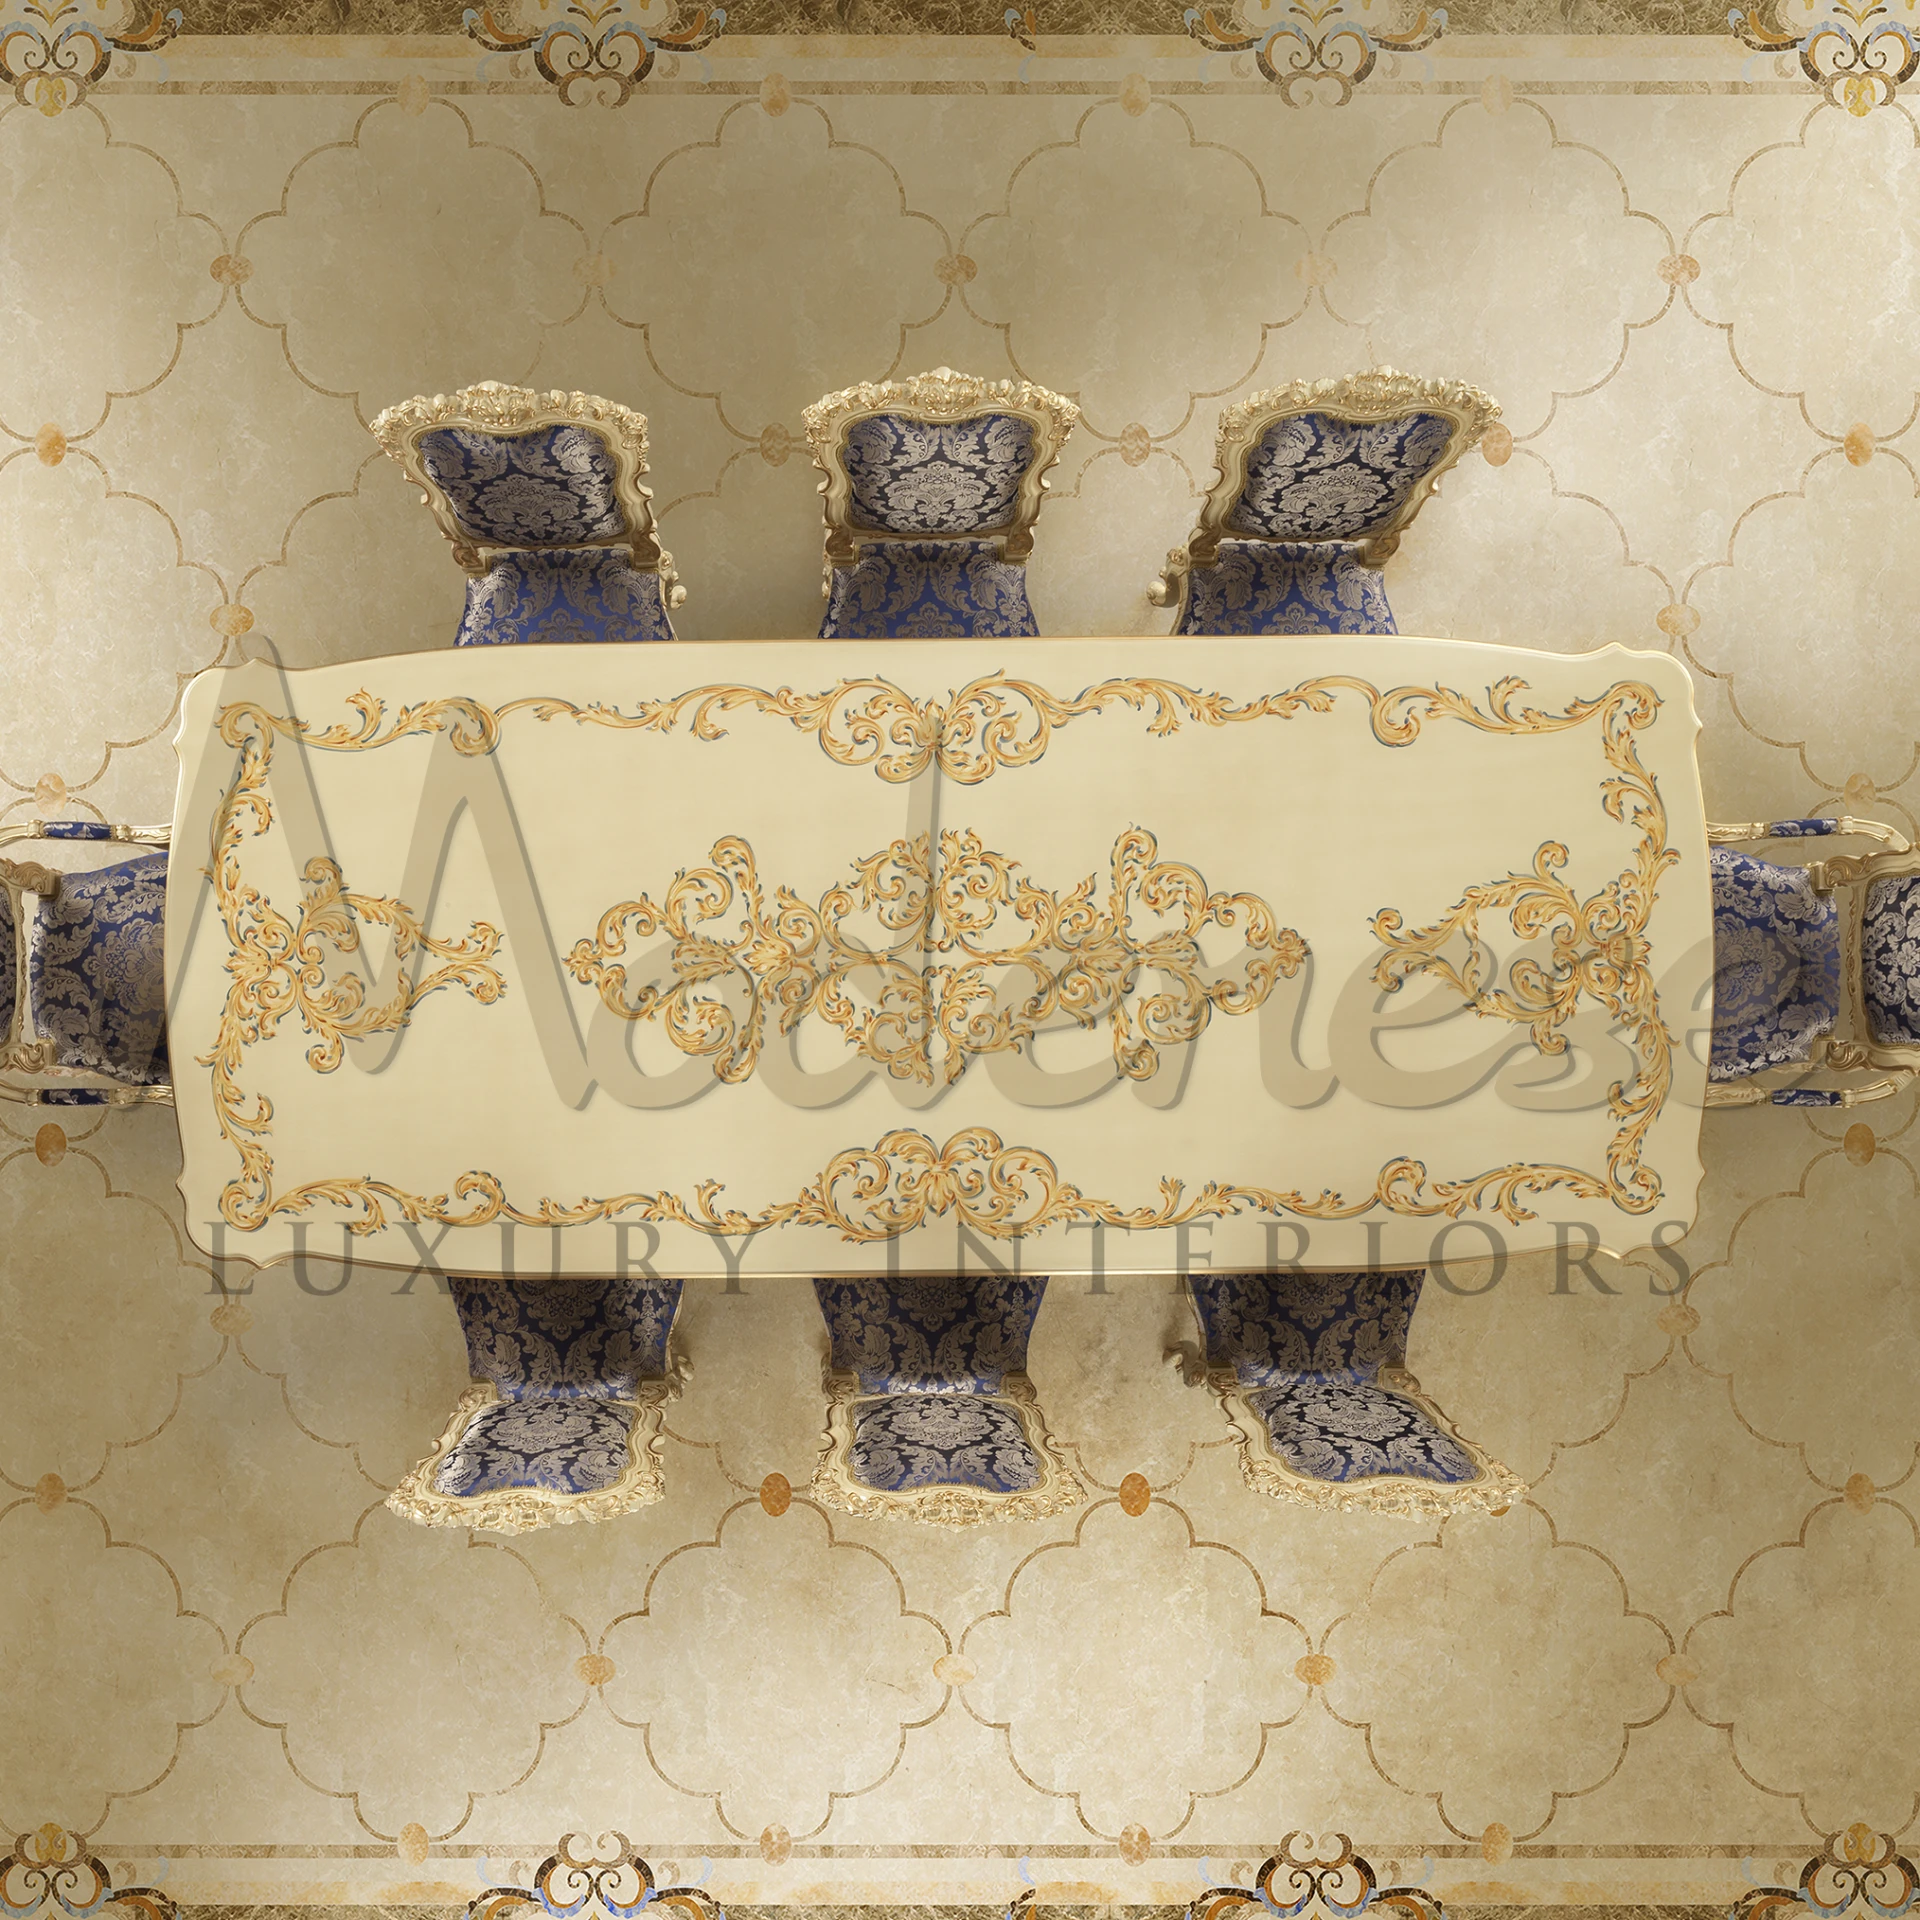 Close-up view of a luxurious round marble table top with finely hand carved chairs with patterned fabric.